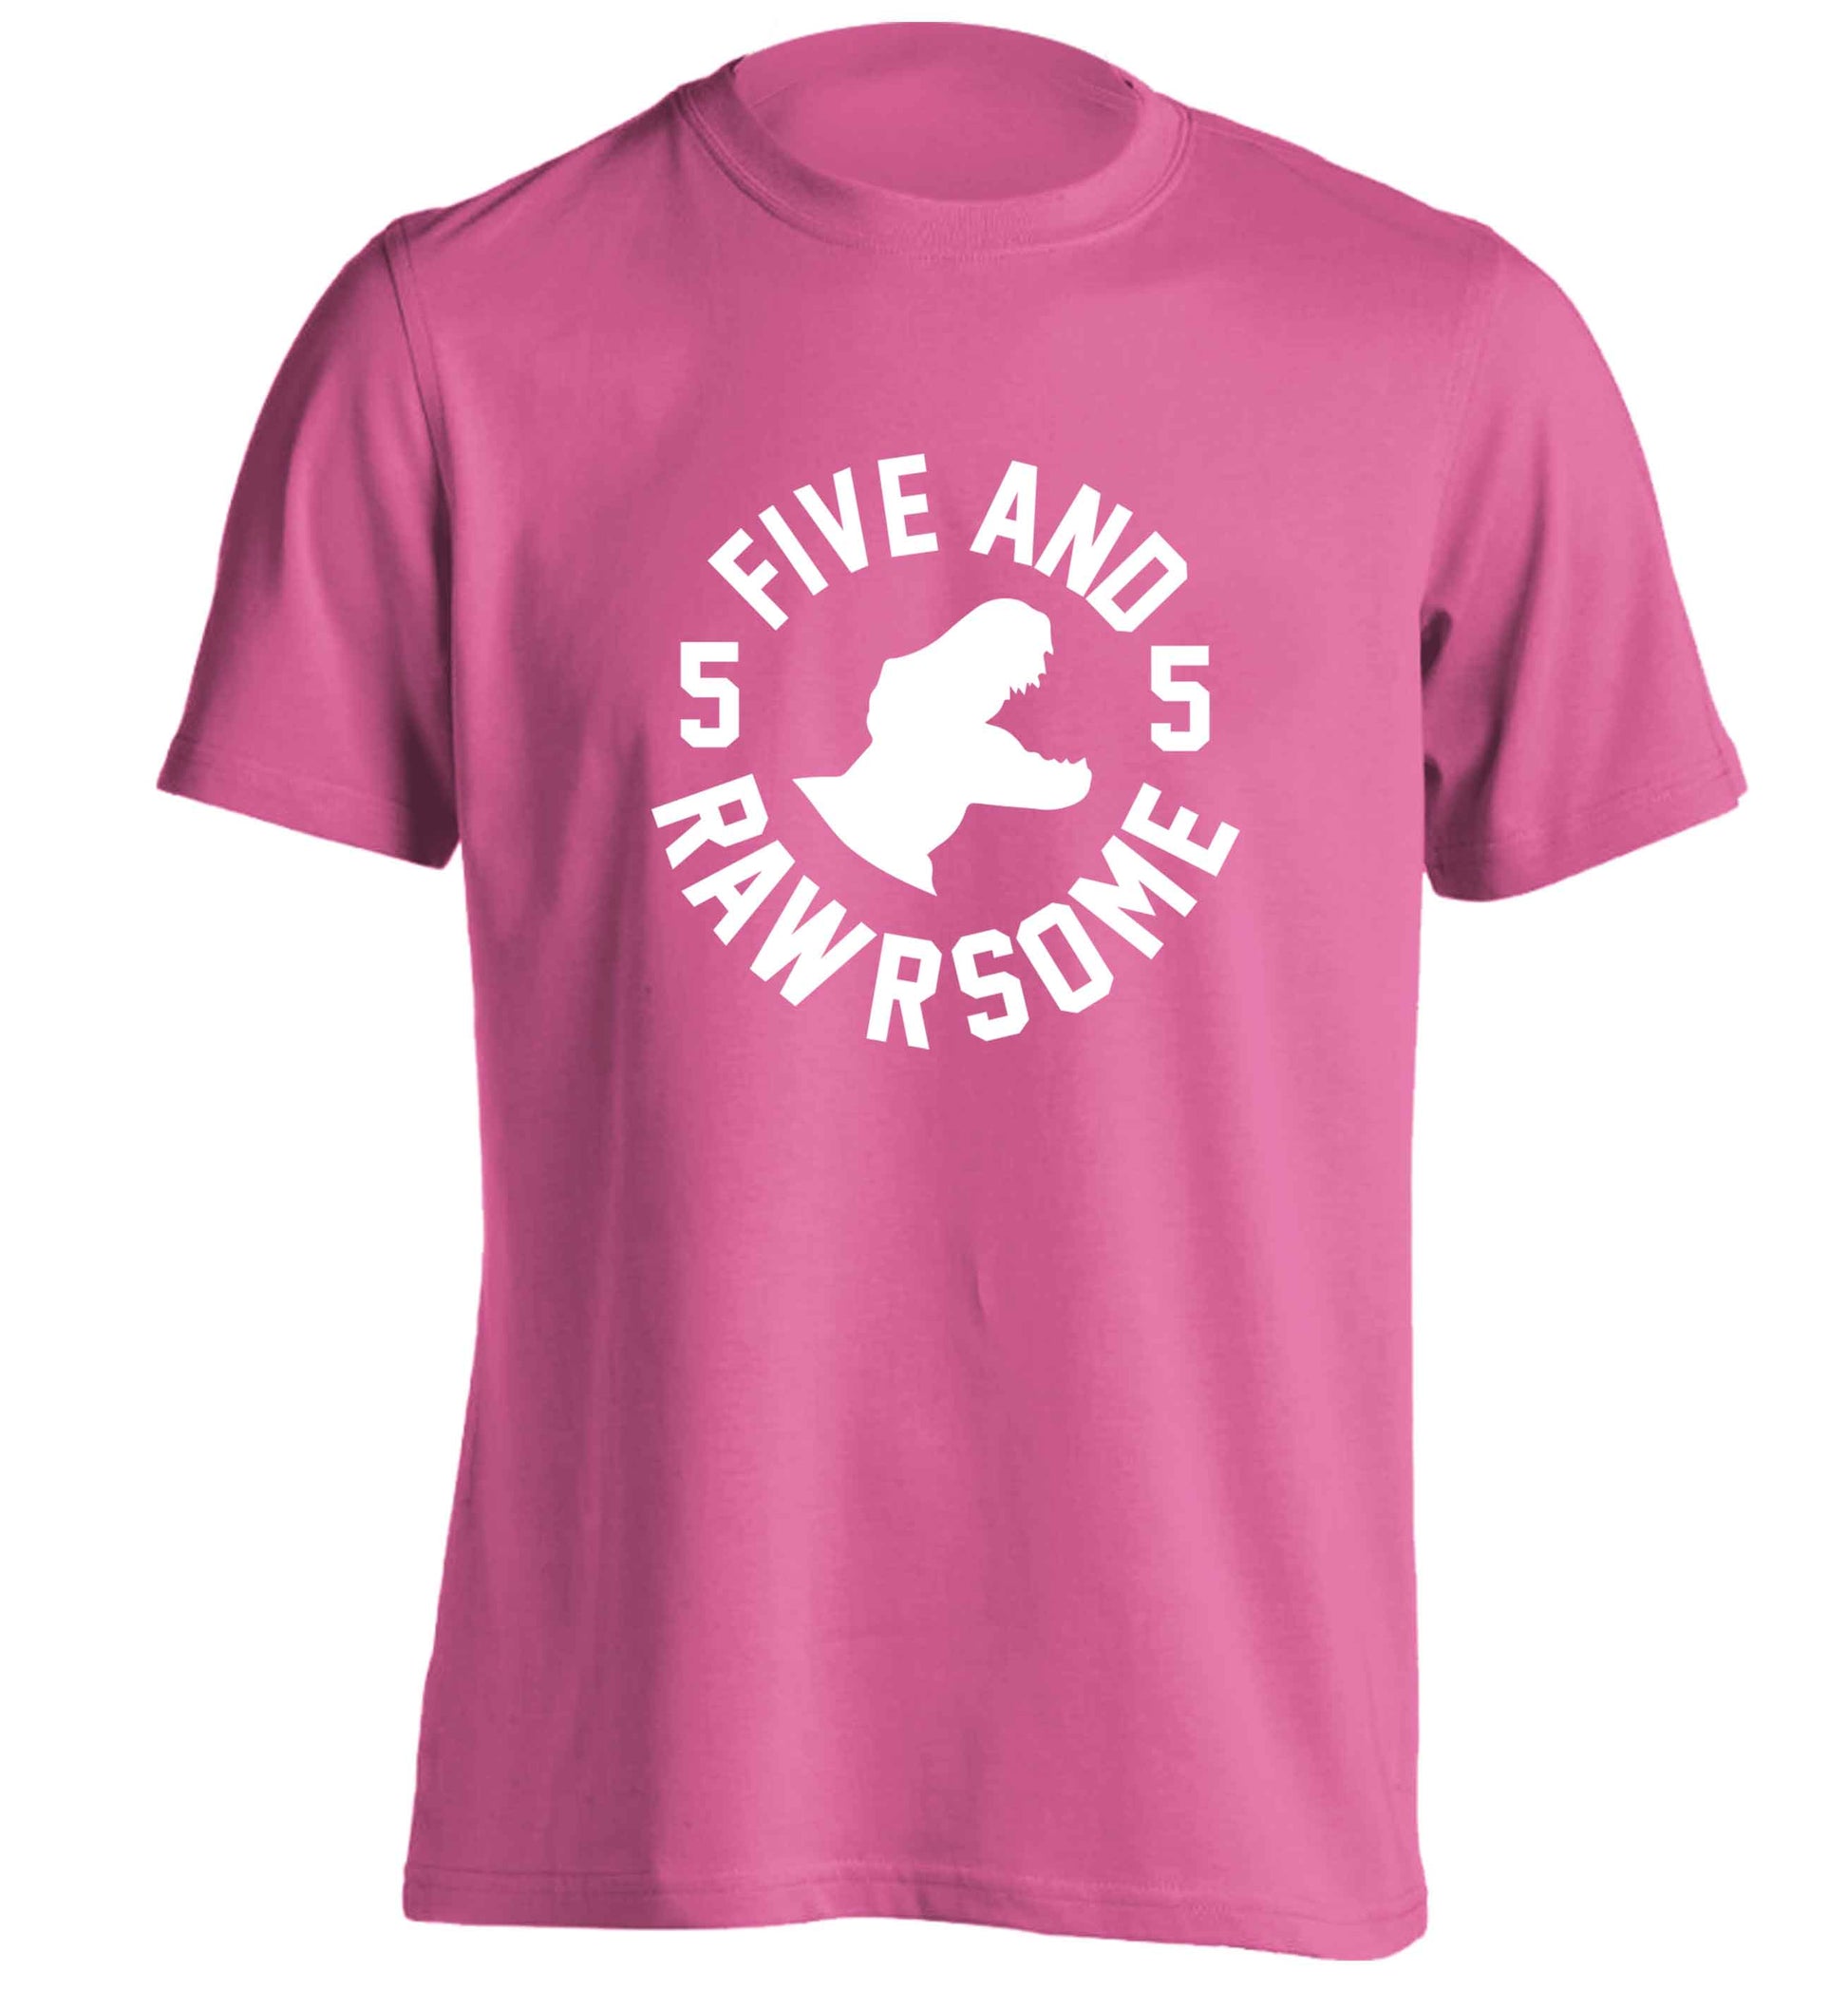 Five and rawrsome adults unisex pink Tshirt 2XL